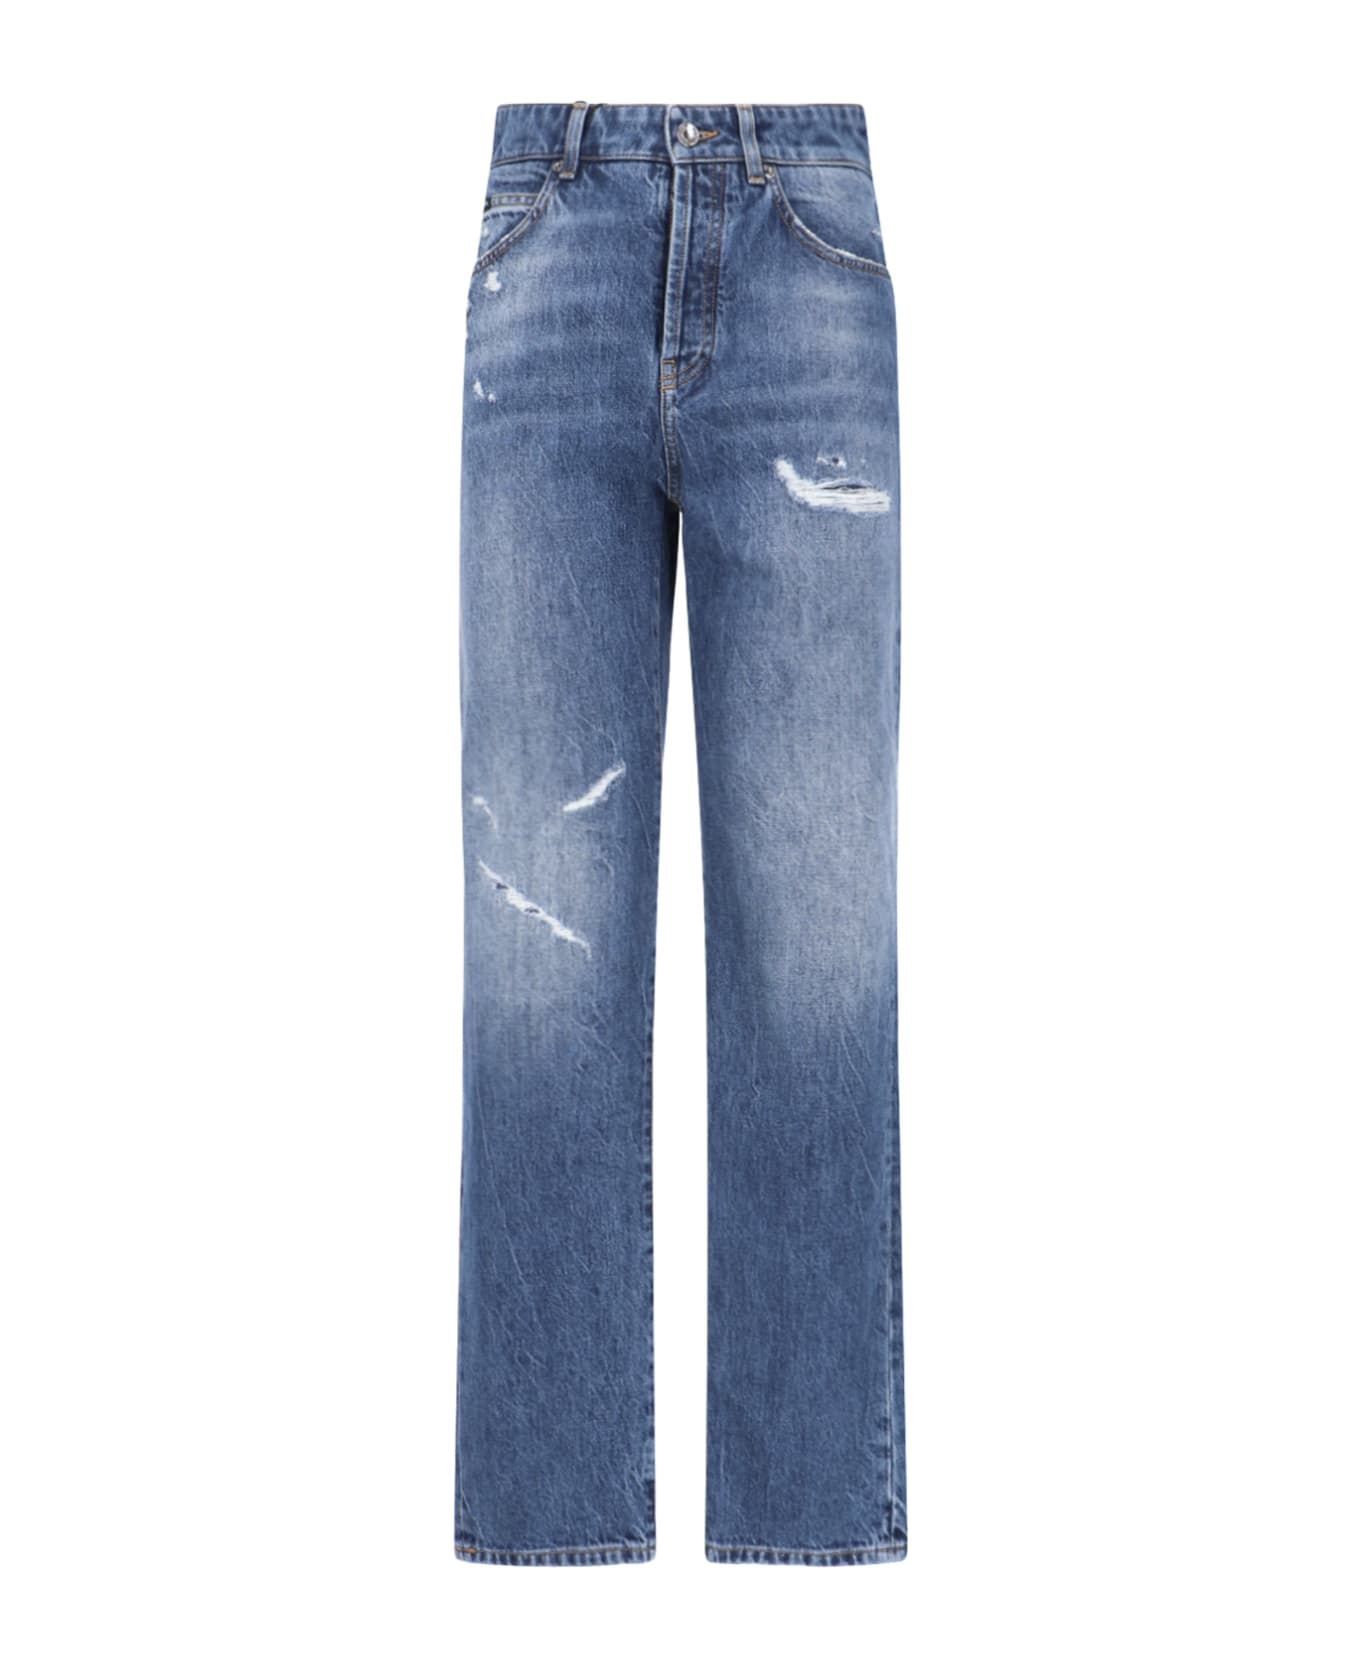 Dolce & Gabbana Ripped Jeans - Blue デニム